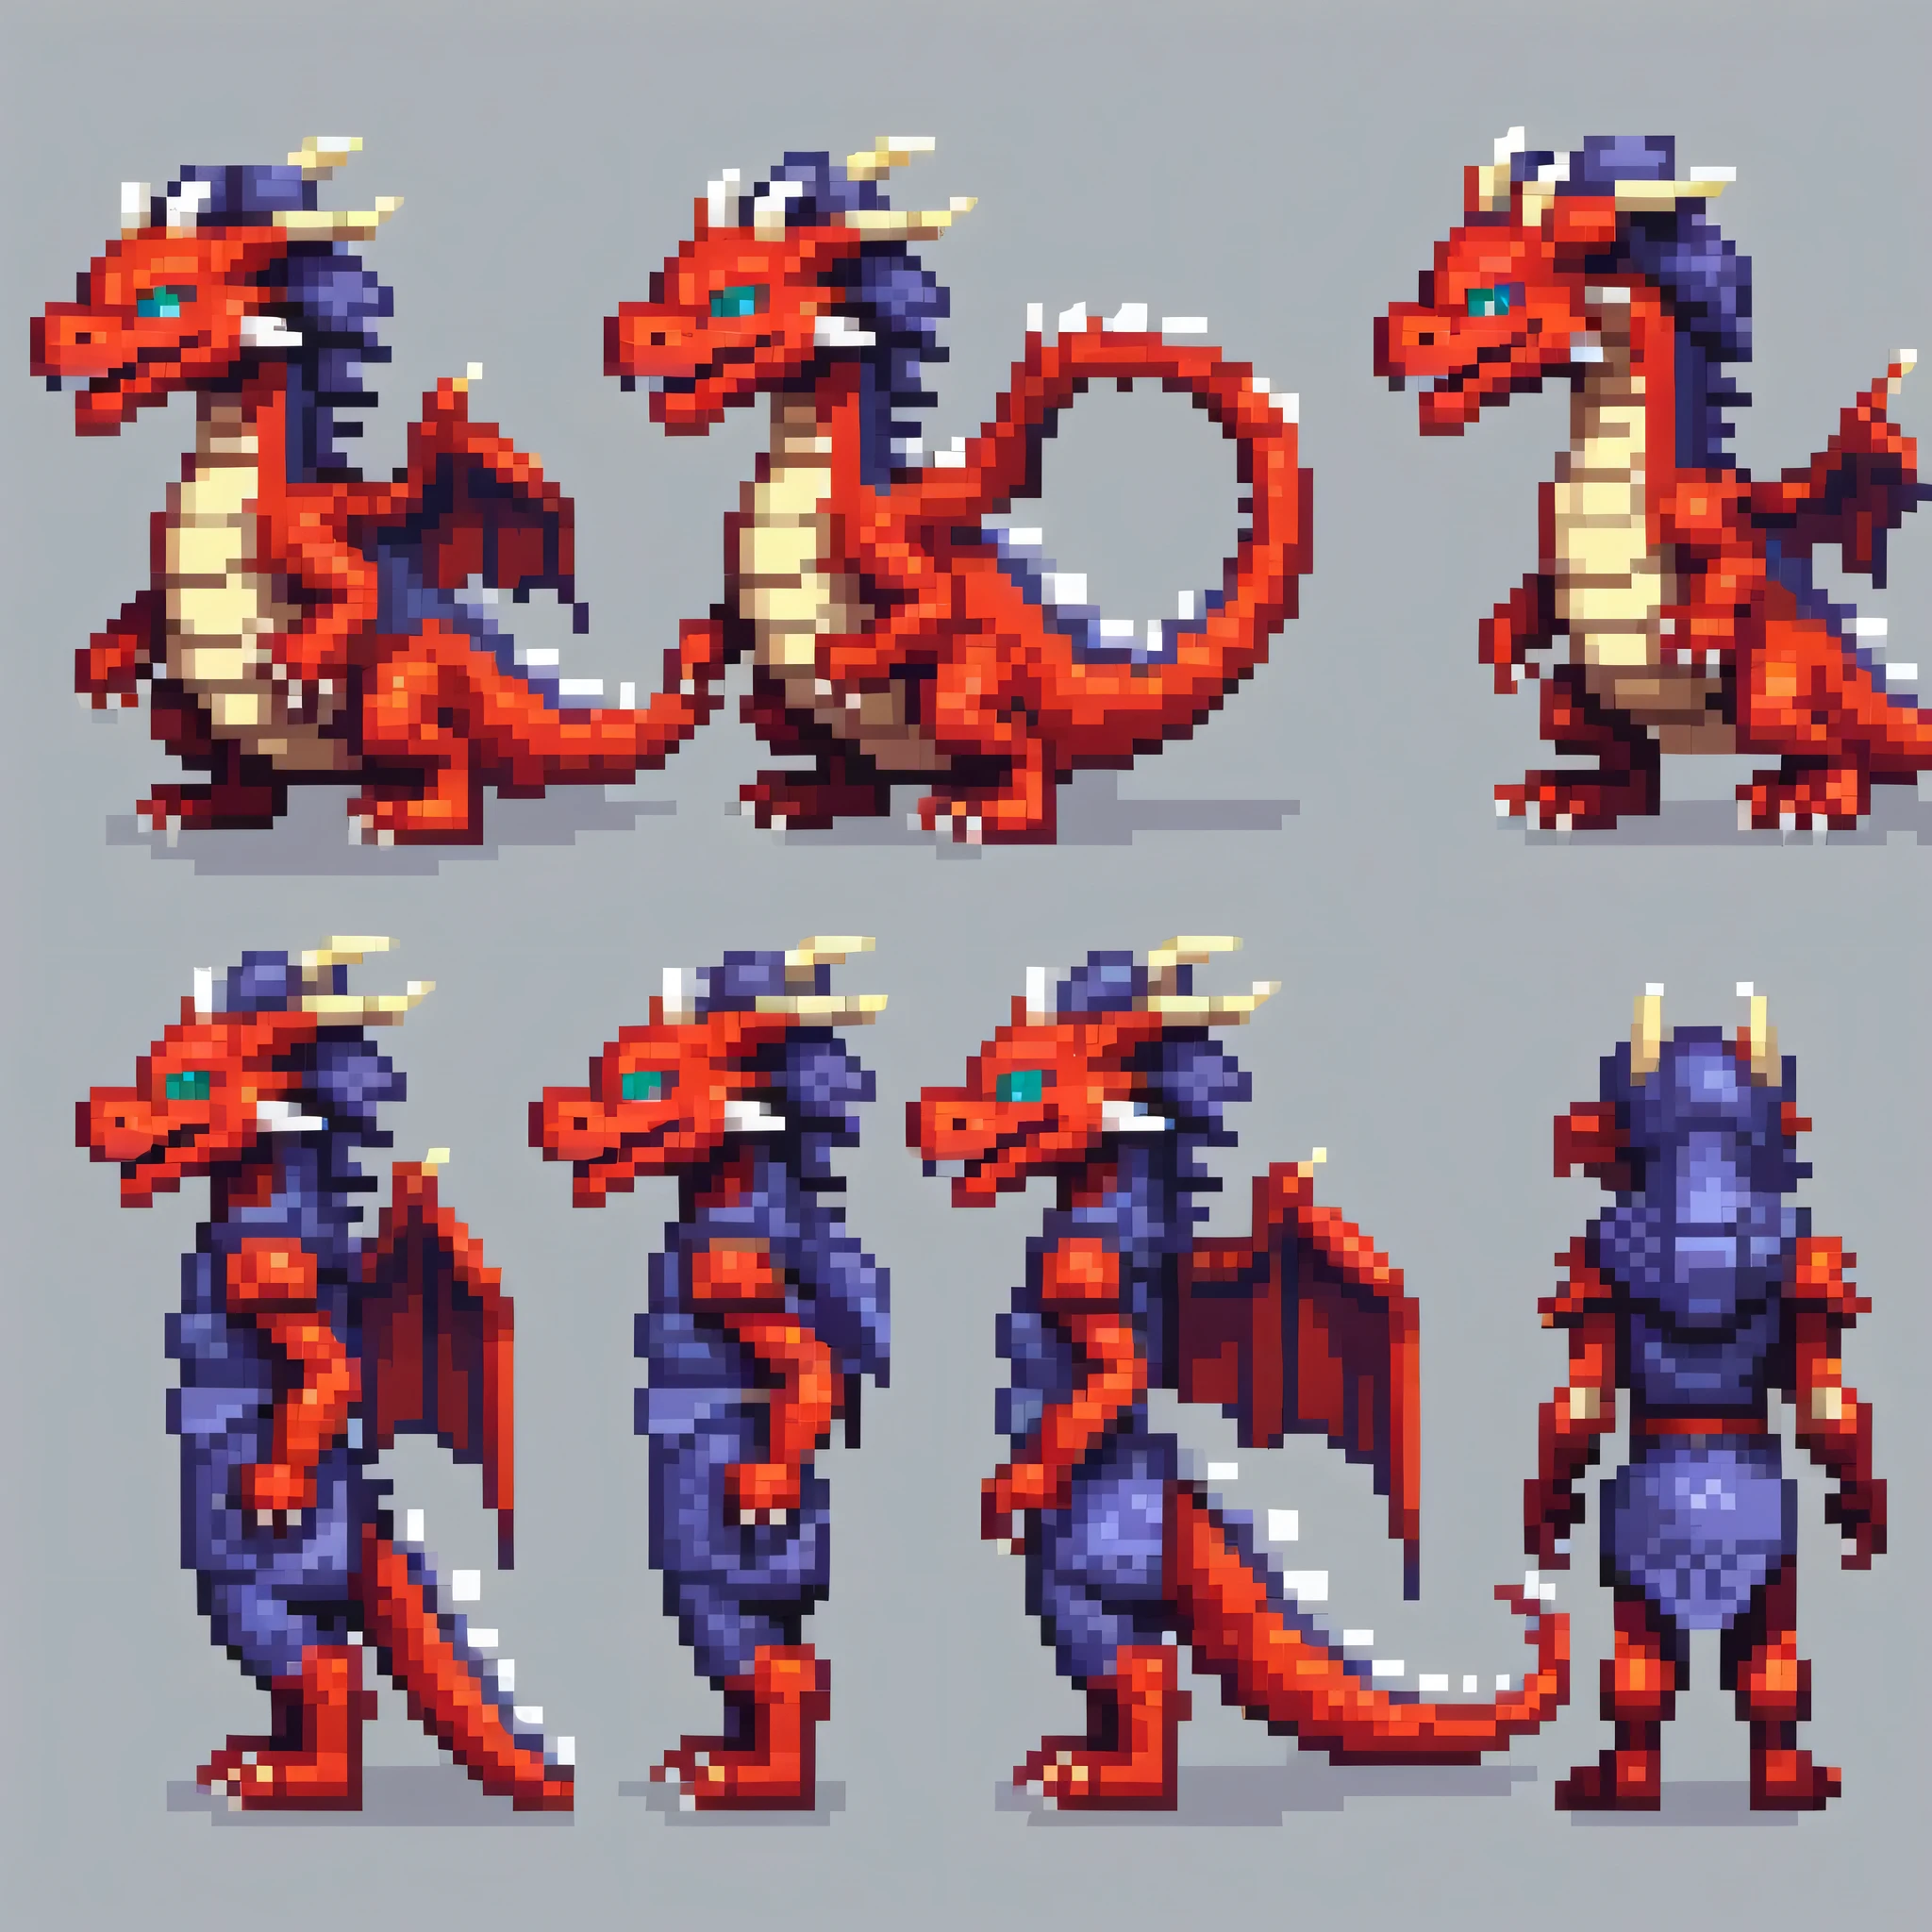 Pixel art,Pixel art,Create a character design sheet,dragon:dragonクエスト:monster:色んな種類のdragonを並べる,((3 views,whole body, background,multiple views,High resolution)),multiple views,multiple poses,Active,action pose,dynamic,nice,cute,masterpiece,highest quality,In detail,Gracefully,RPG,Famicom,multiple characters,multiple costumes,dragonクエスト,boldly,rich colors,colorful